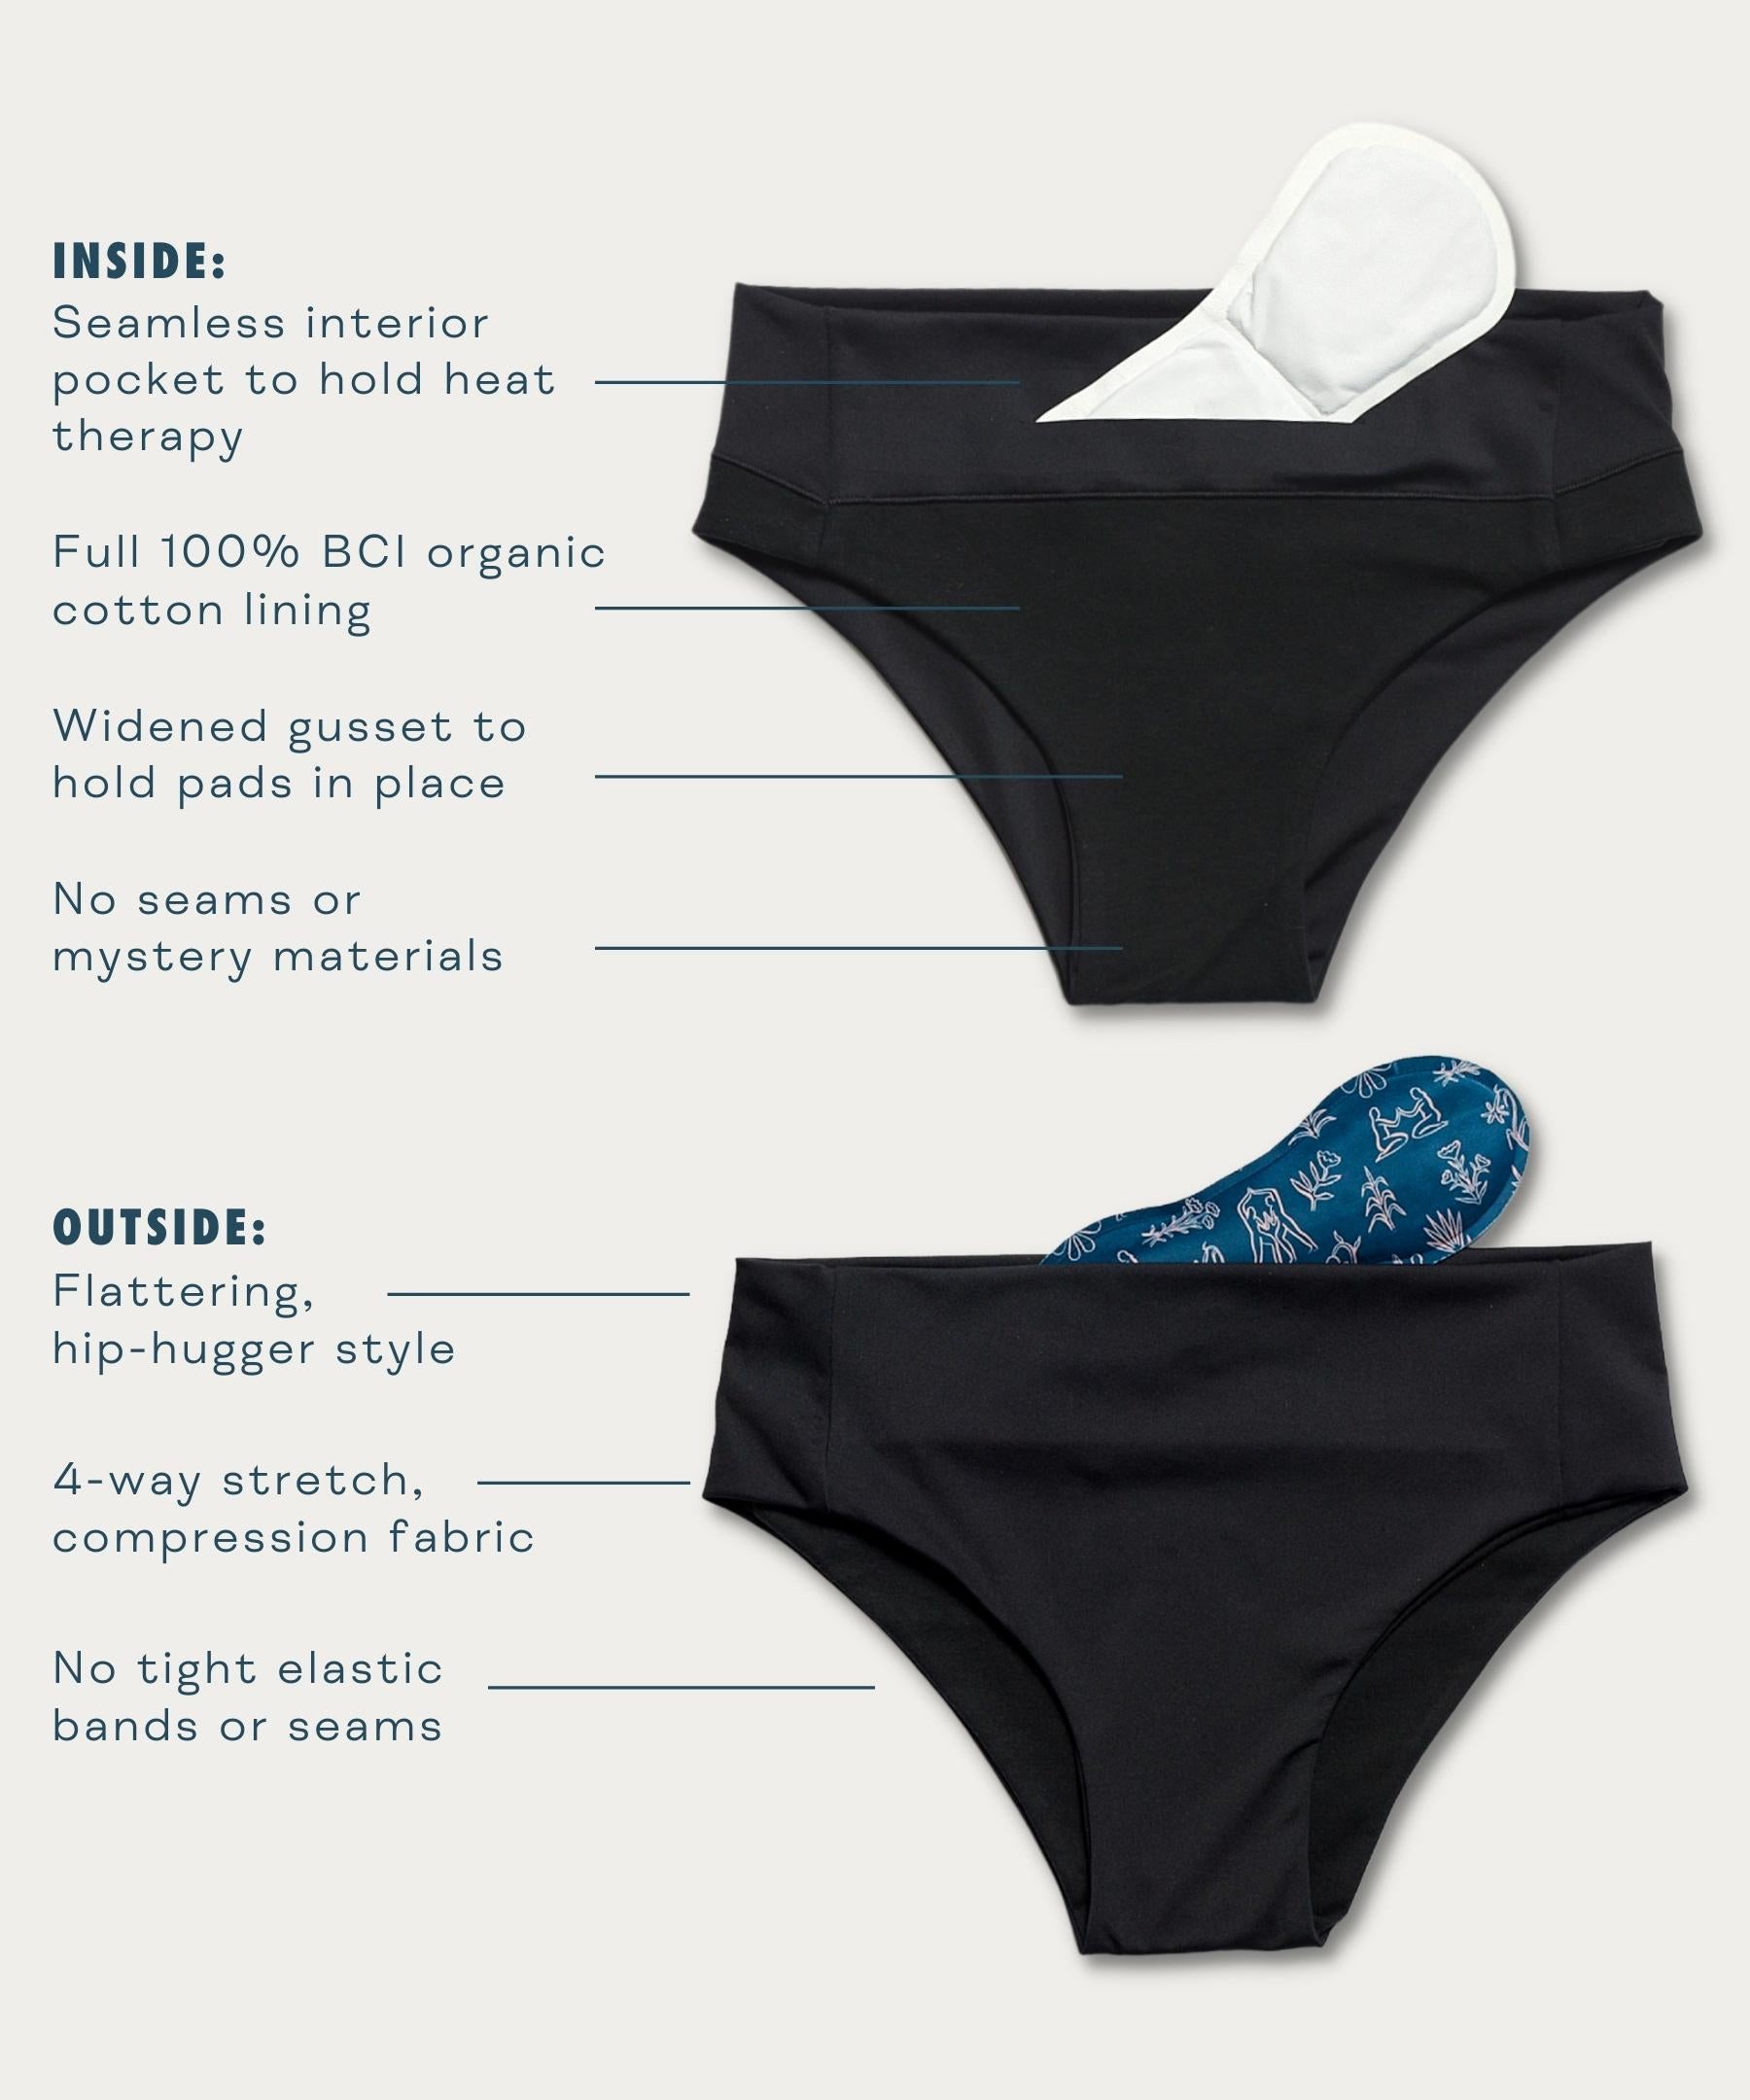 Wholesale organic period panties In Sexy And Comfortable Styles 